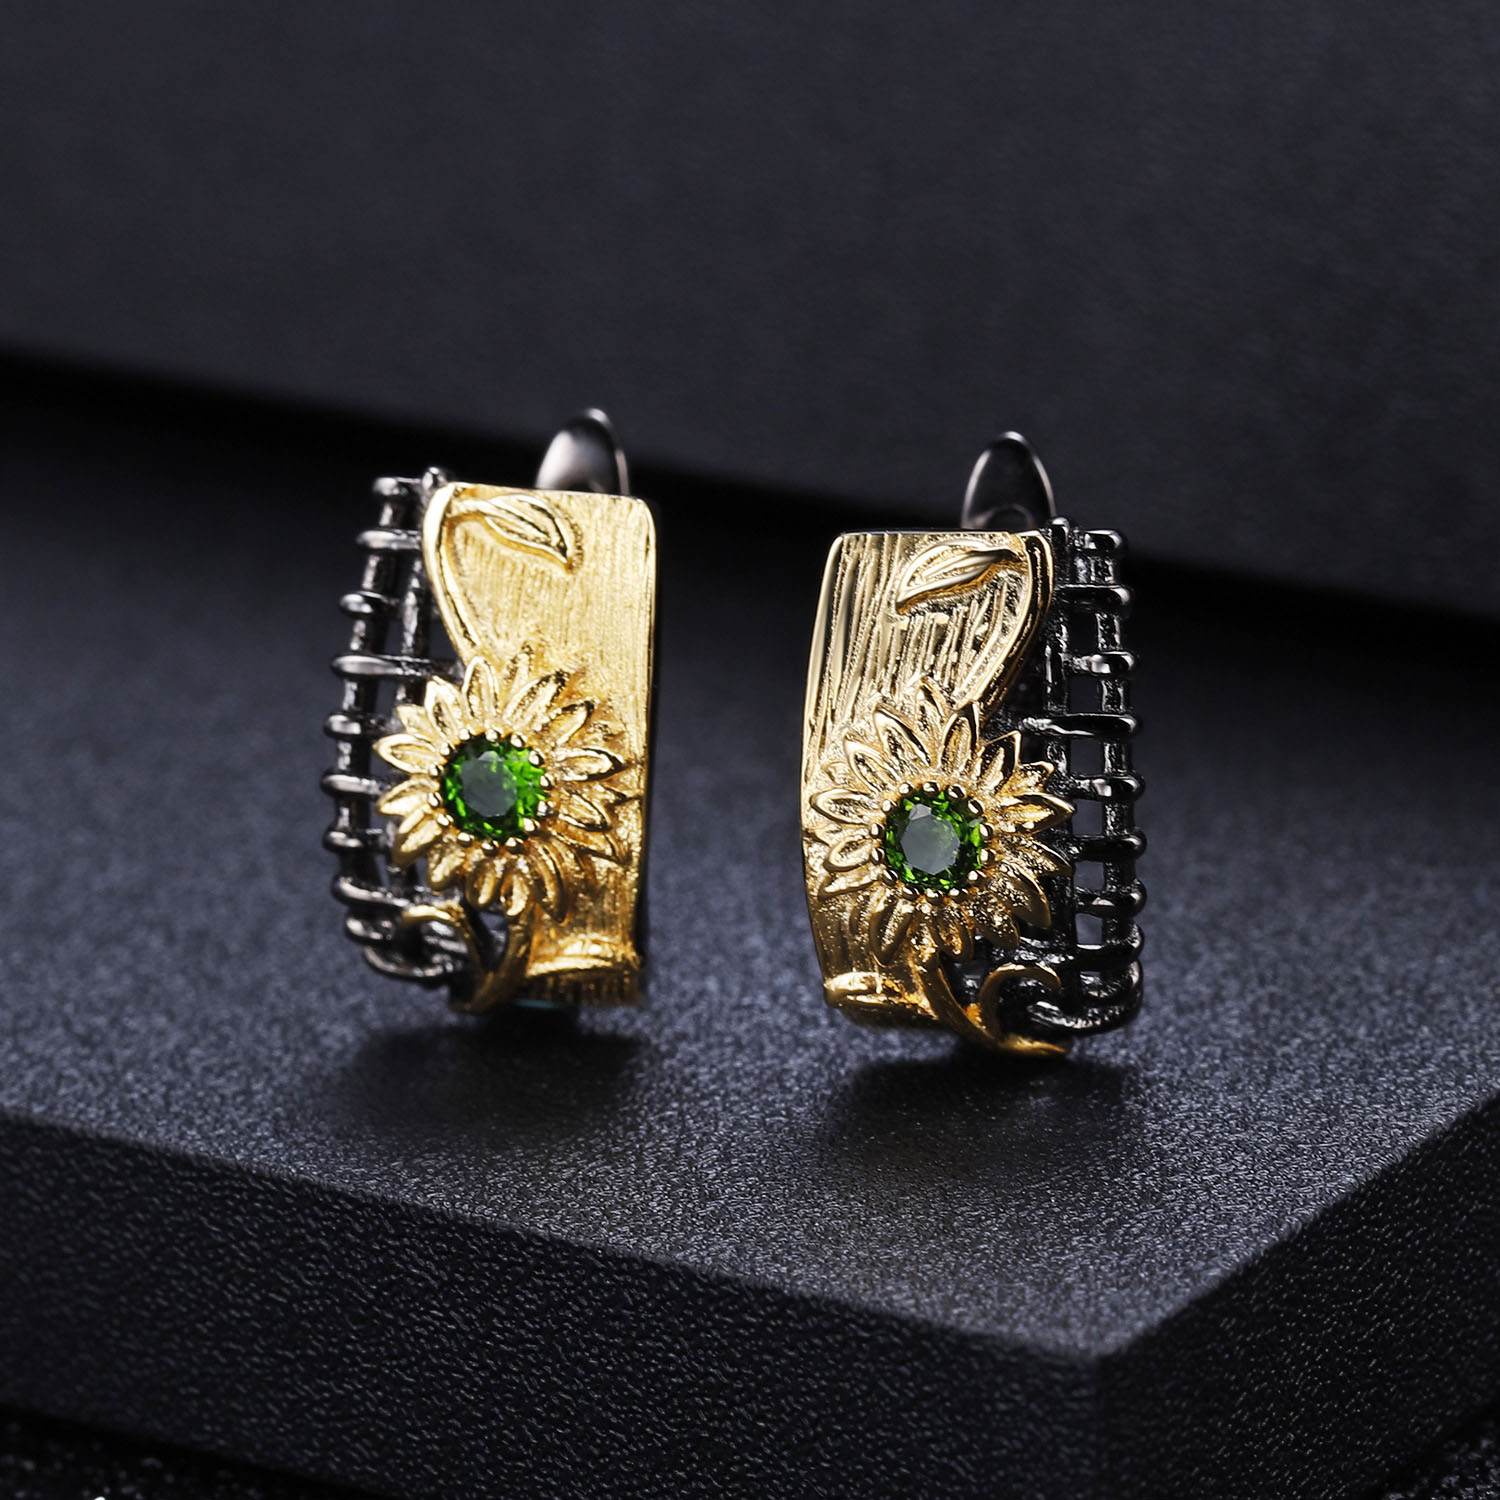 Cultural jewelry for girlfriend earrings Does not change color Strong design sense